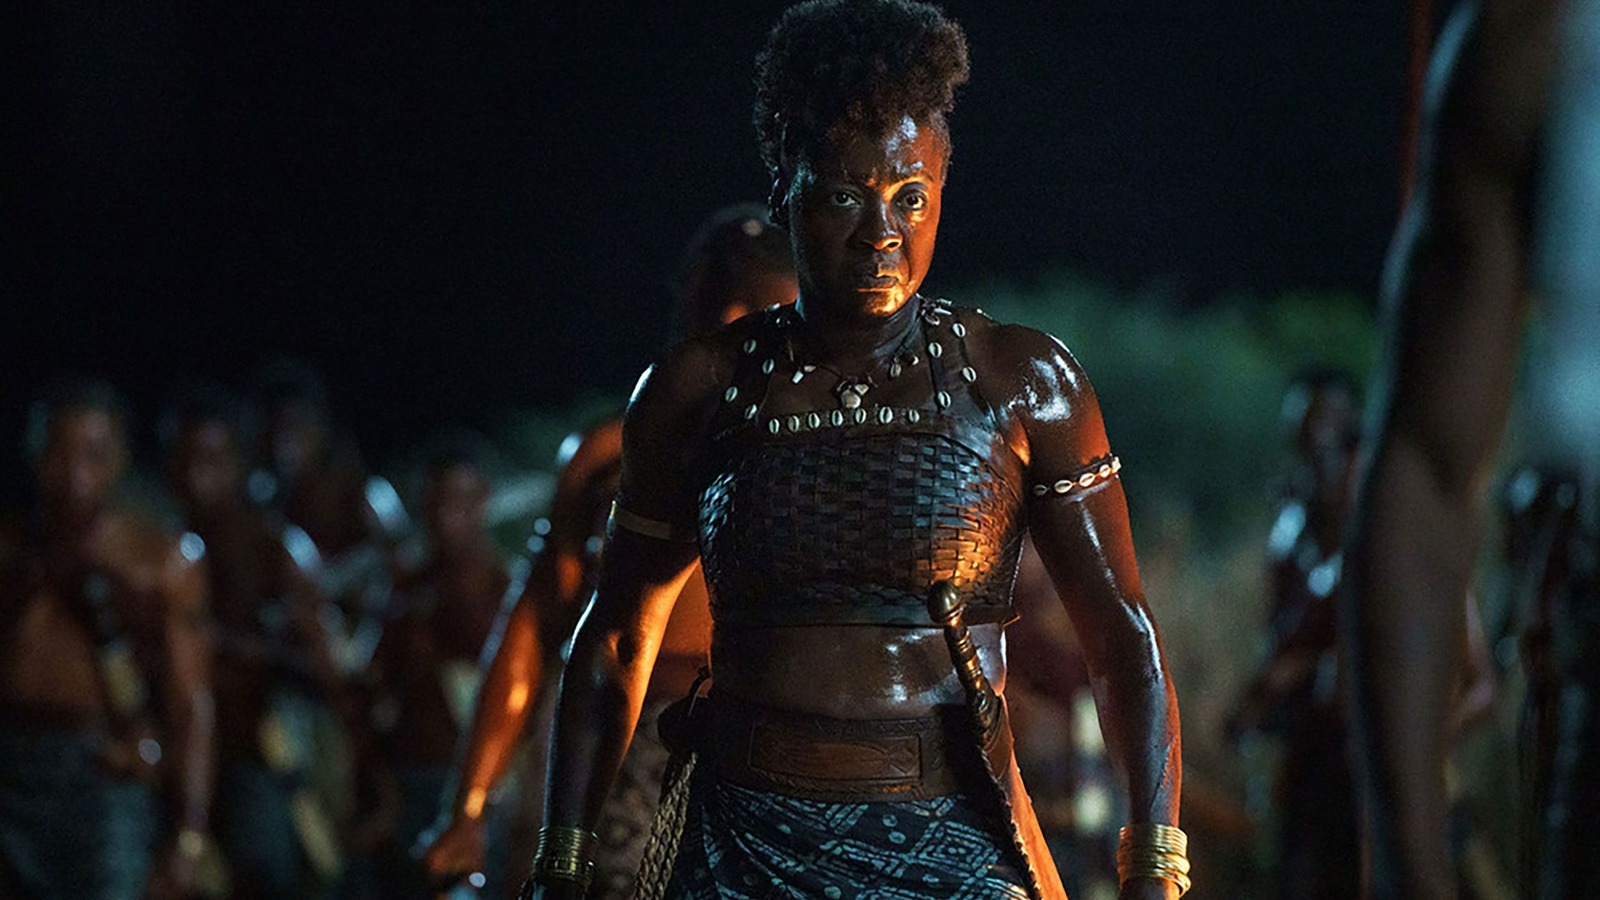 Training for the female king was a massive undertaking for Viola Davis and the cast